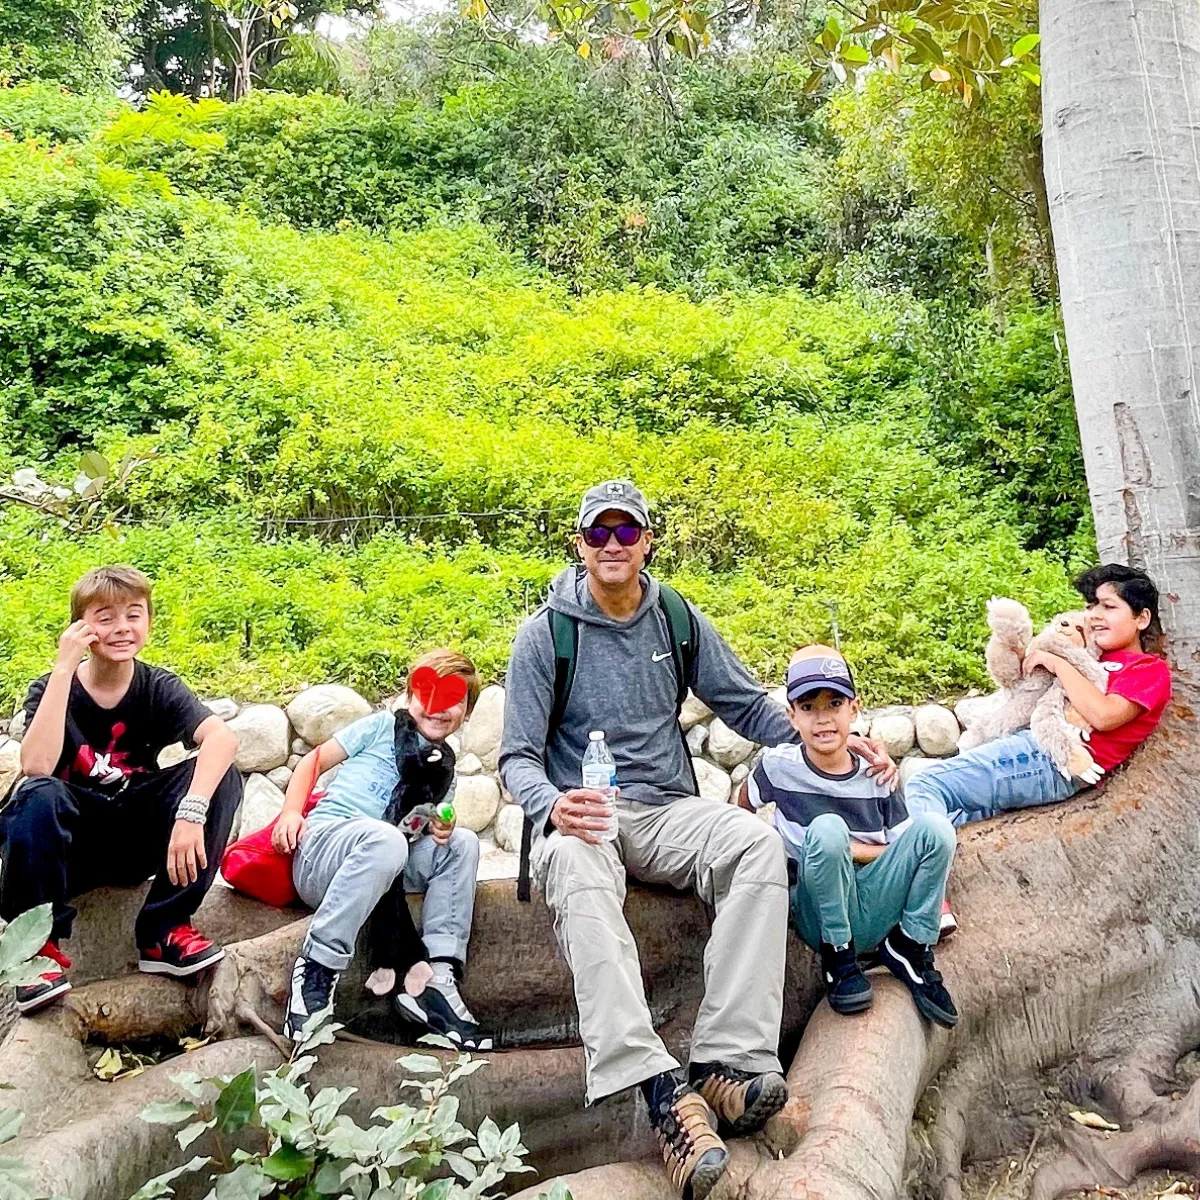 Ellemercito students resting under a tree